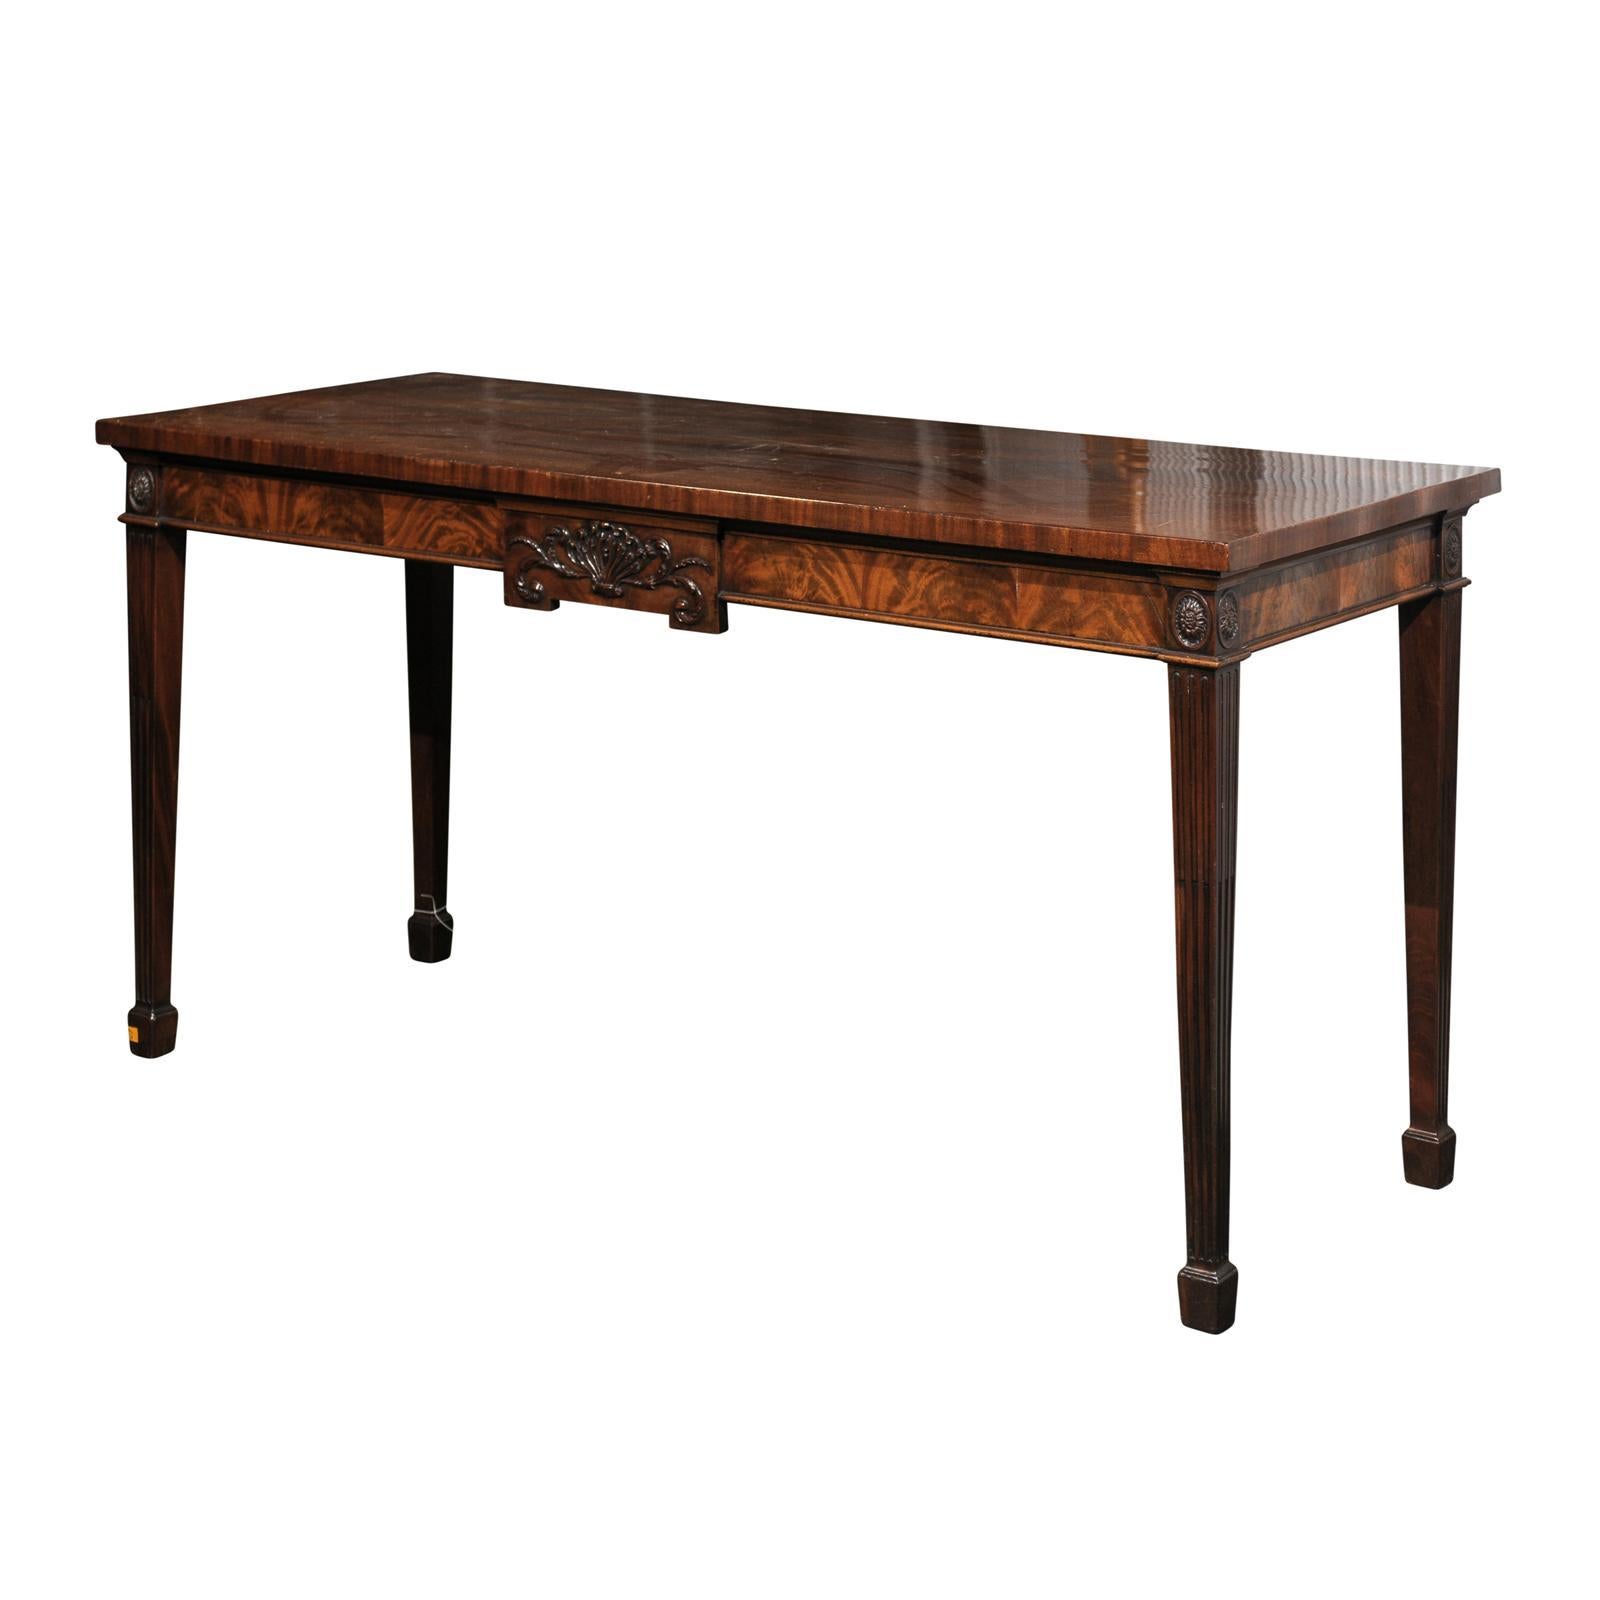 19th Century English Mahogany Serving Table with Carved Shell & Fluted Legs